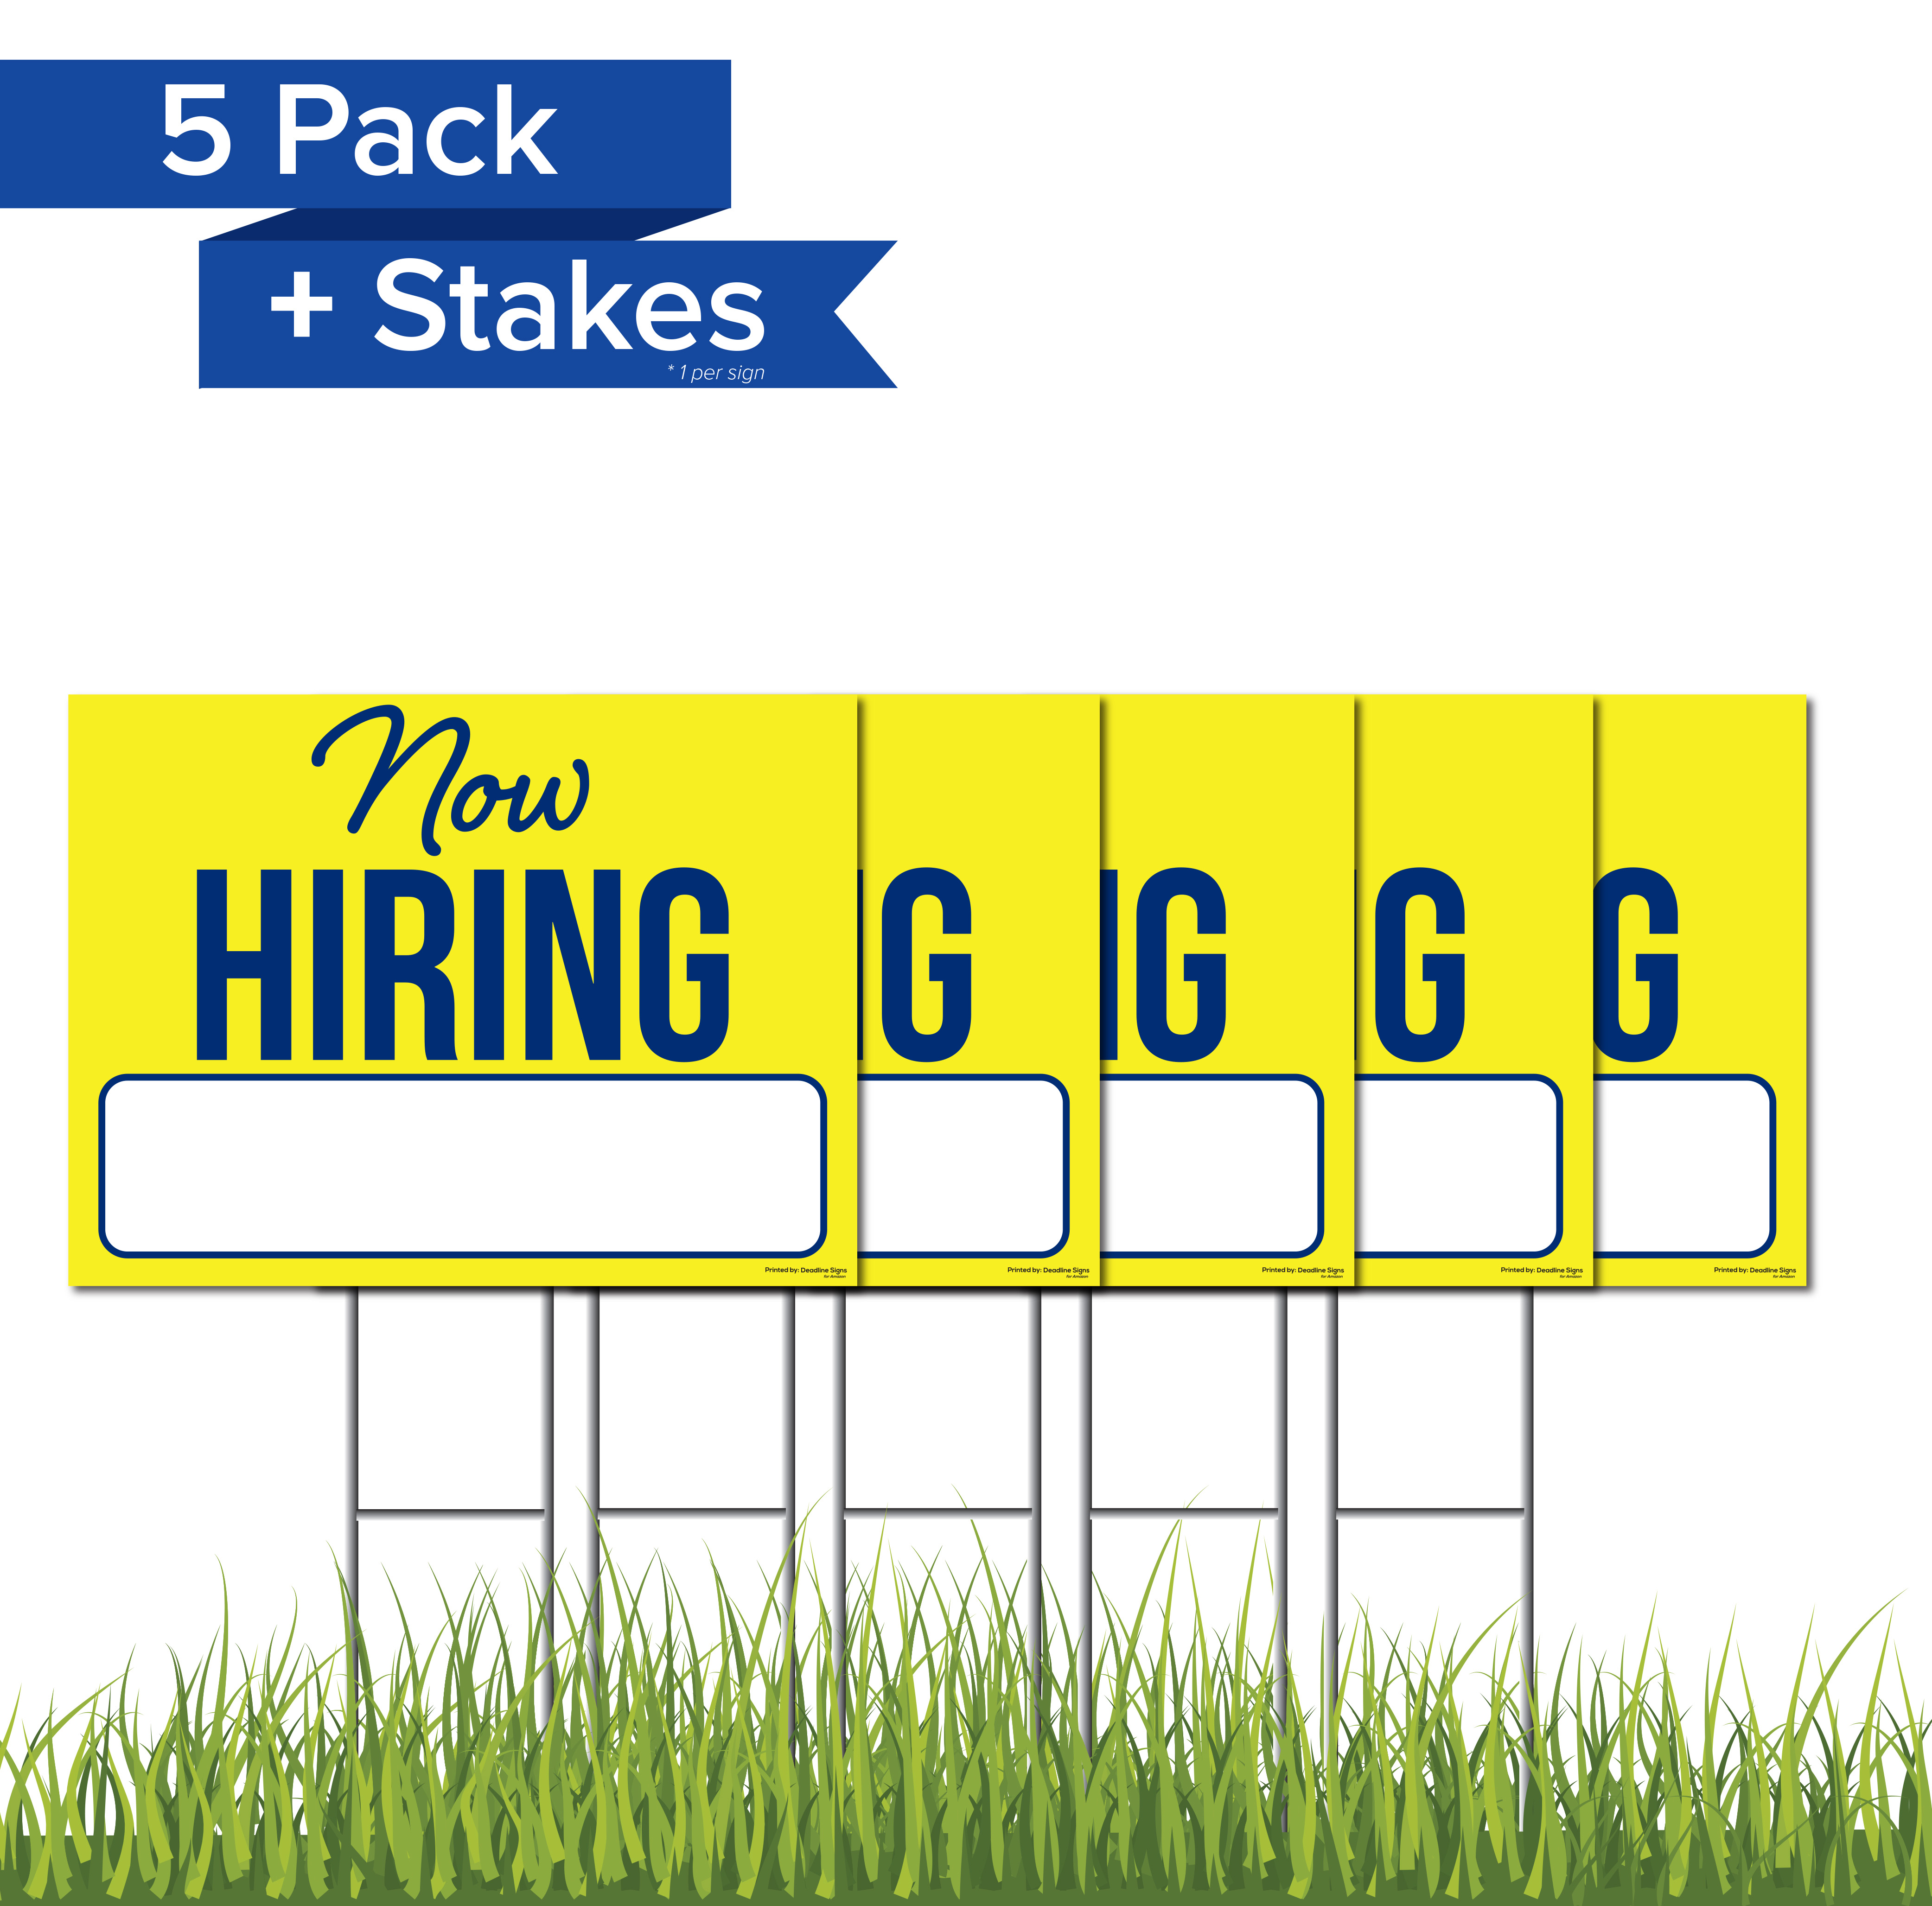 Stripes Gray Perforated Window Decal CGSignLab 24x24 Now Hiring Apply Inside 5-Pack